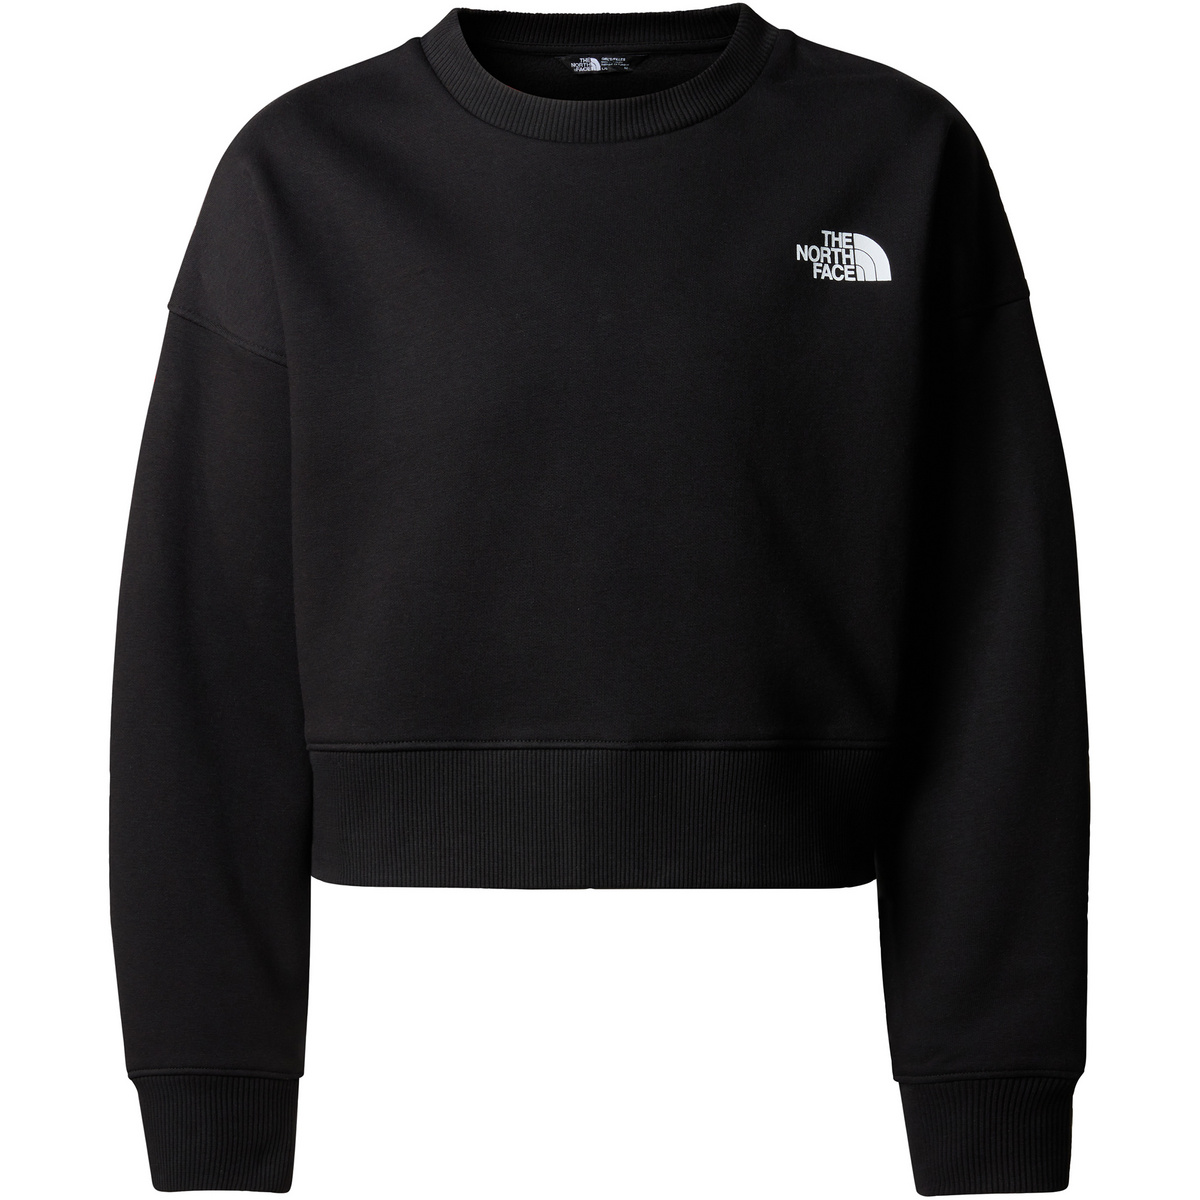 The North Face Kinder G New Cutline Crew Fleece Pullover von The North Face